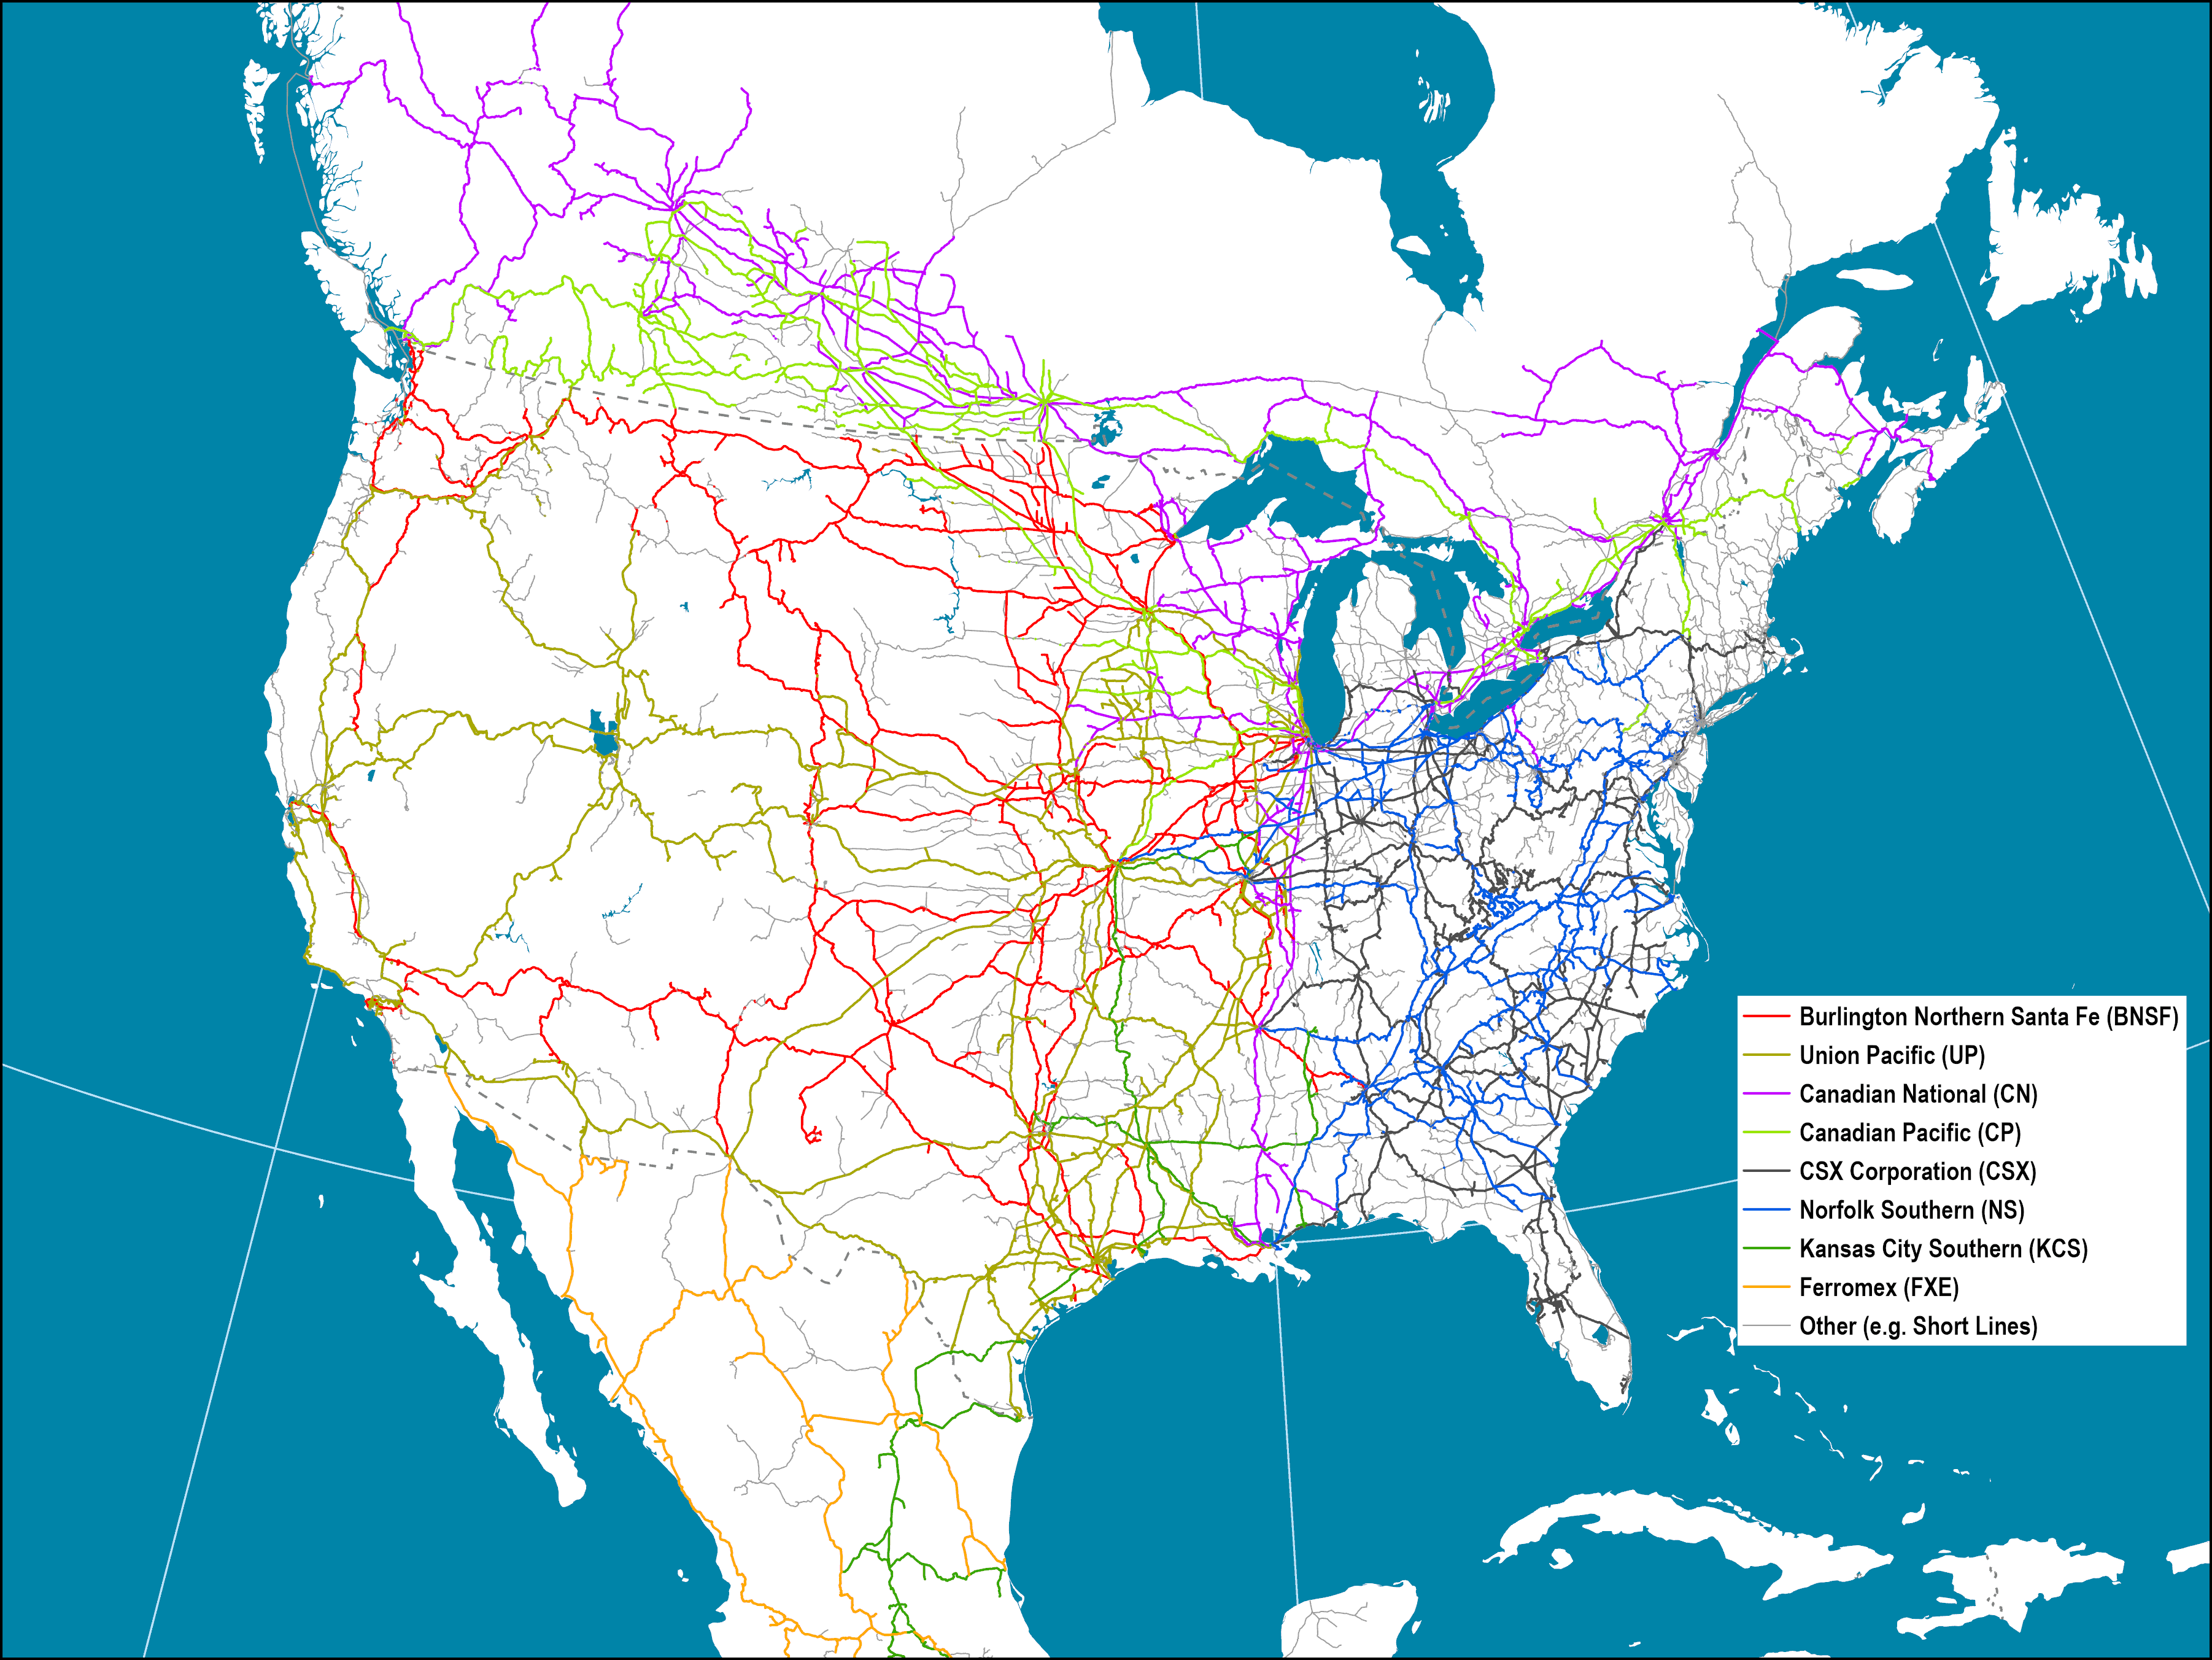 Ownership Of Major North American Rail Lines 21 The Geography Of Transport Systems